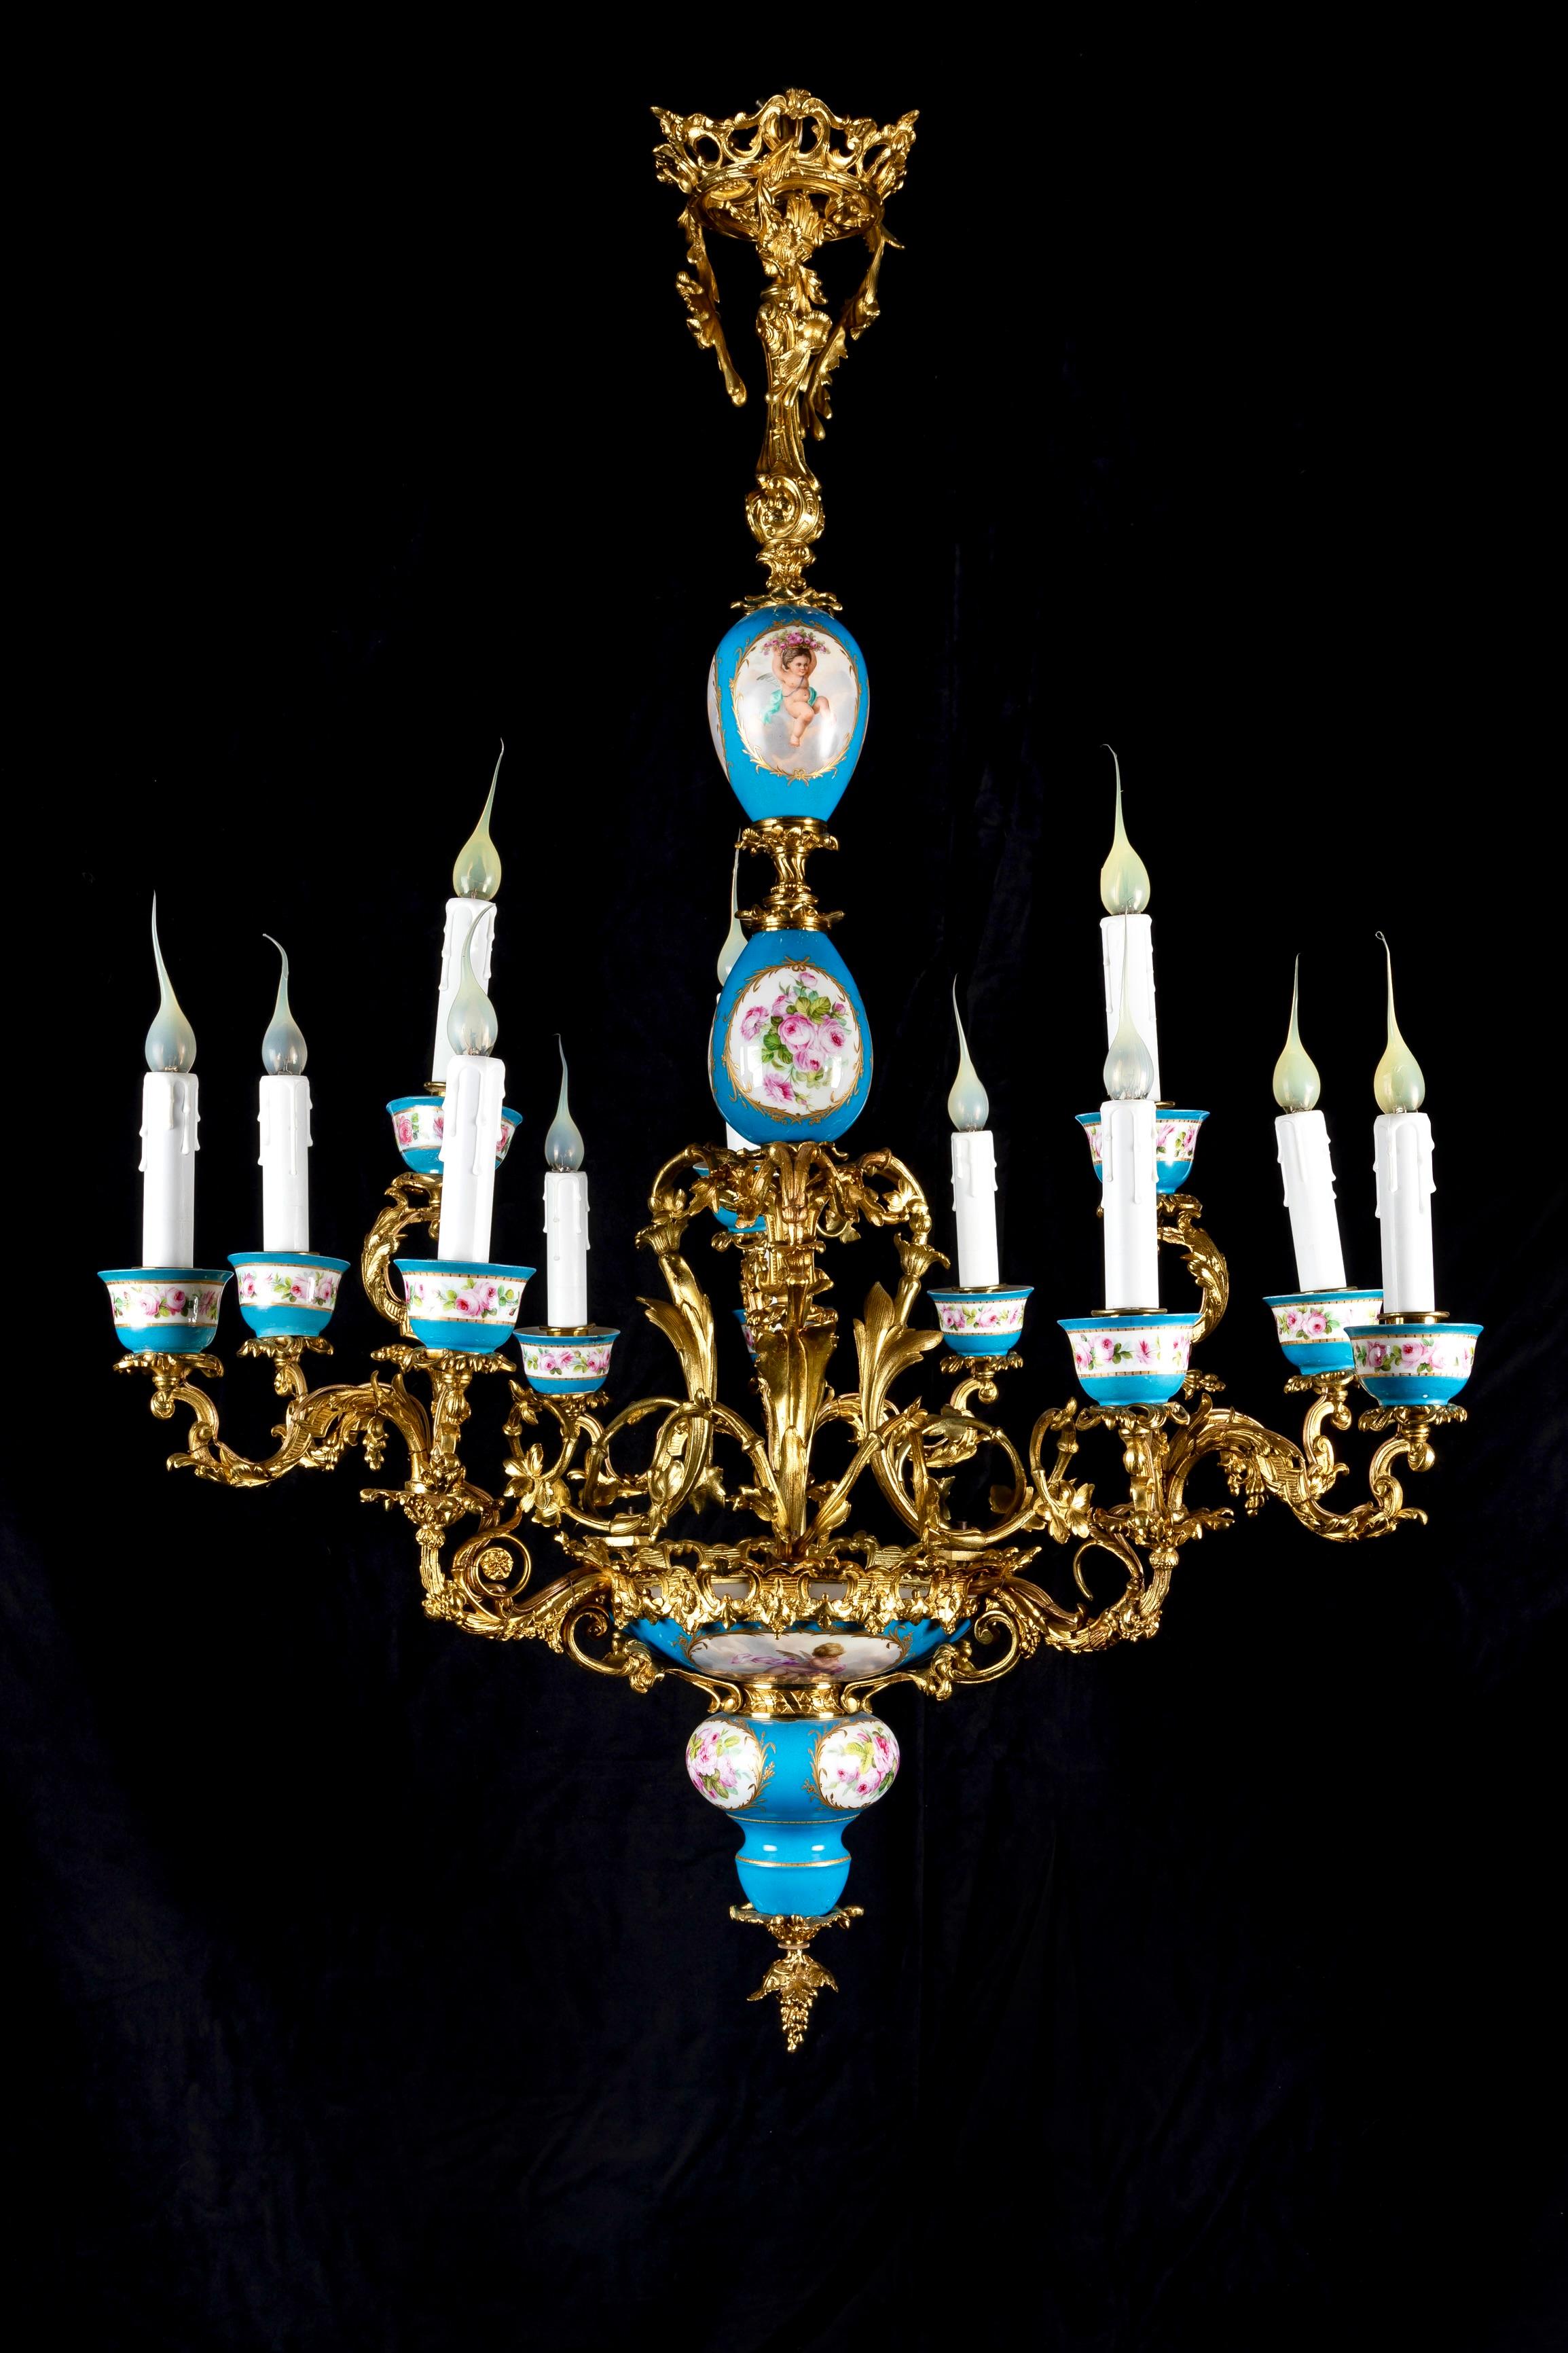 A Spectacular large 19th century blue Sevres porcelain and gilt bronze multi arm double tier chandelier of exquisite craftsmanship. The main body of this unique blue Sevres porcelain chandelier displays 12 oval form panels of polychromed hand